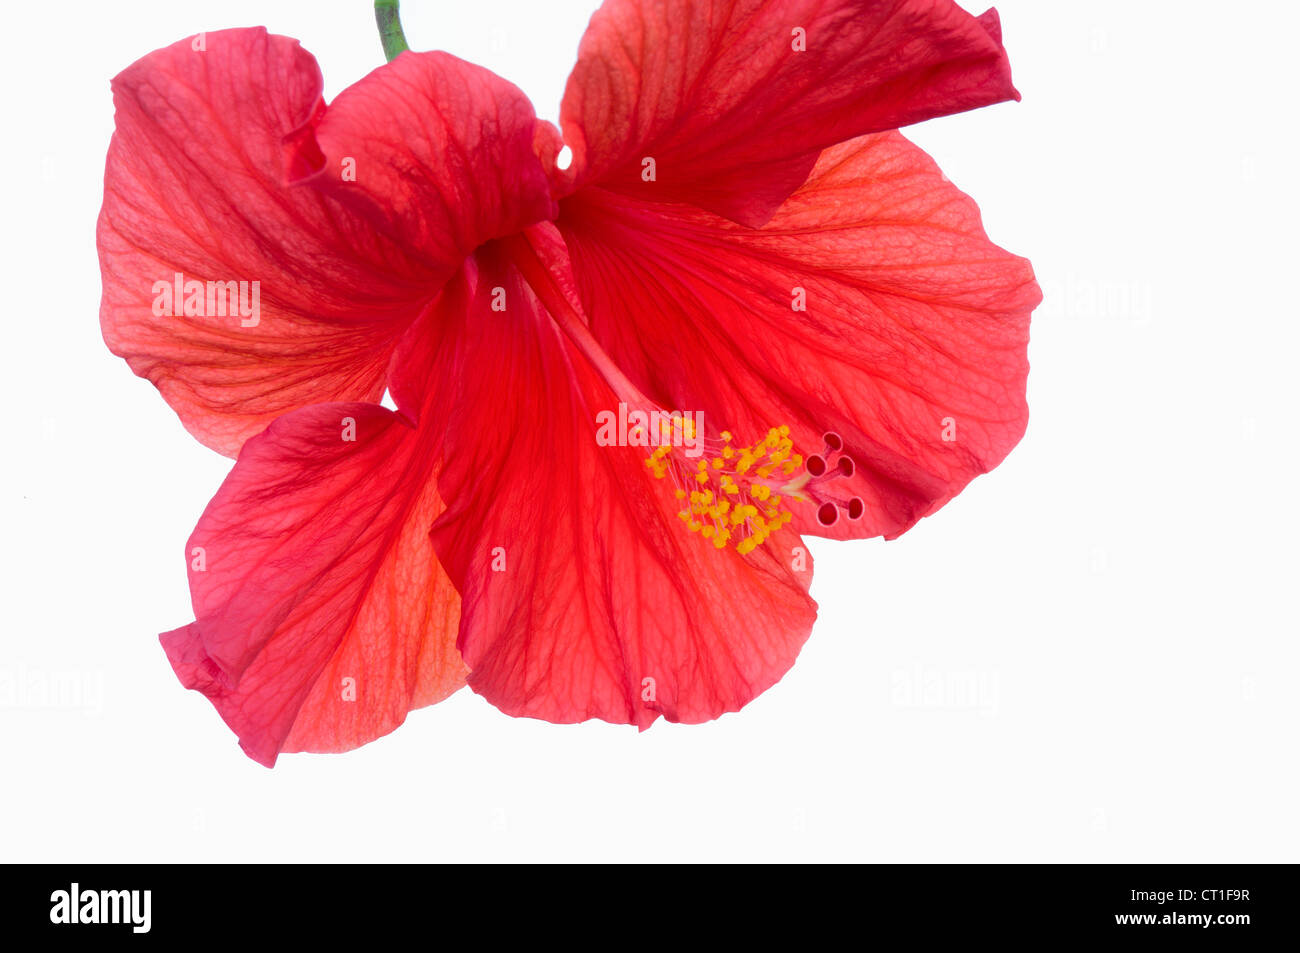 Closeup of red Hibiscus flower with vibrant red petals showing pistils and anthers atop stamen against white background Stock Photo